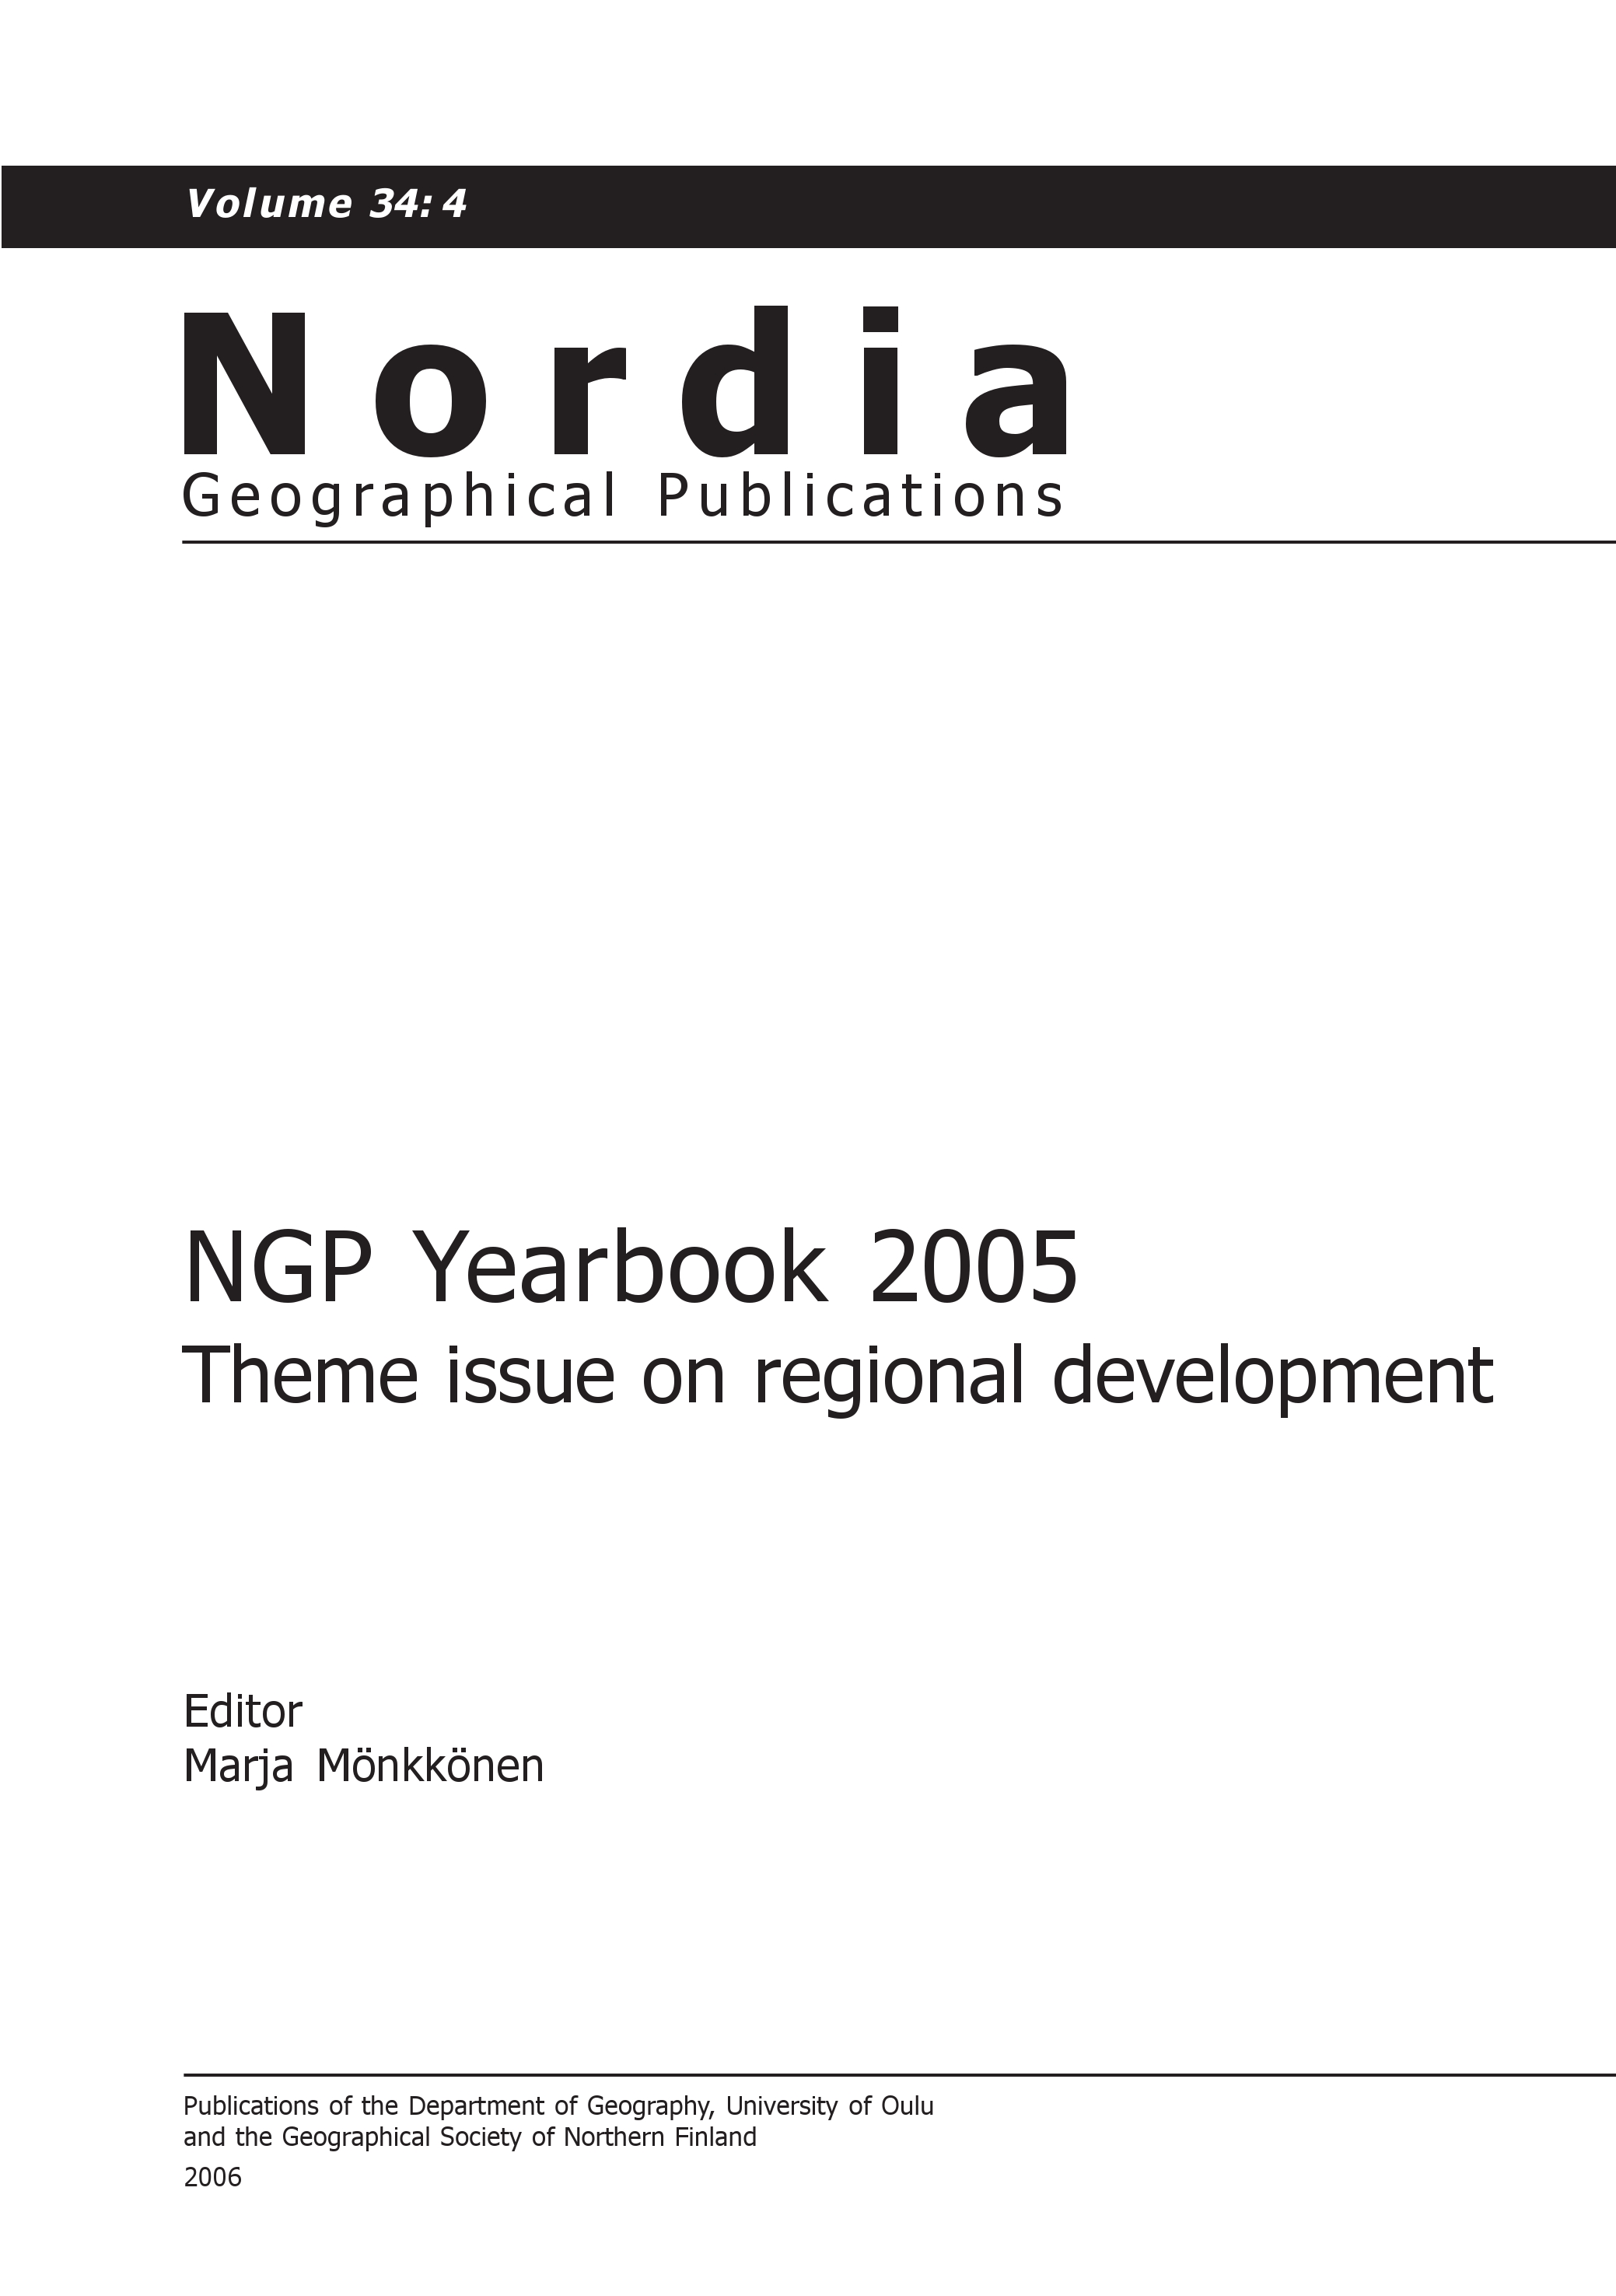 					View Vol. 34 No. 4: NGP Yearbook 2005: Theme issue on regional development
				